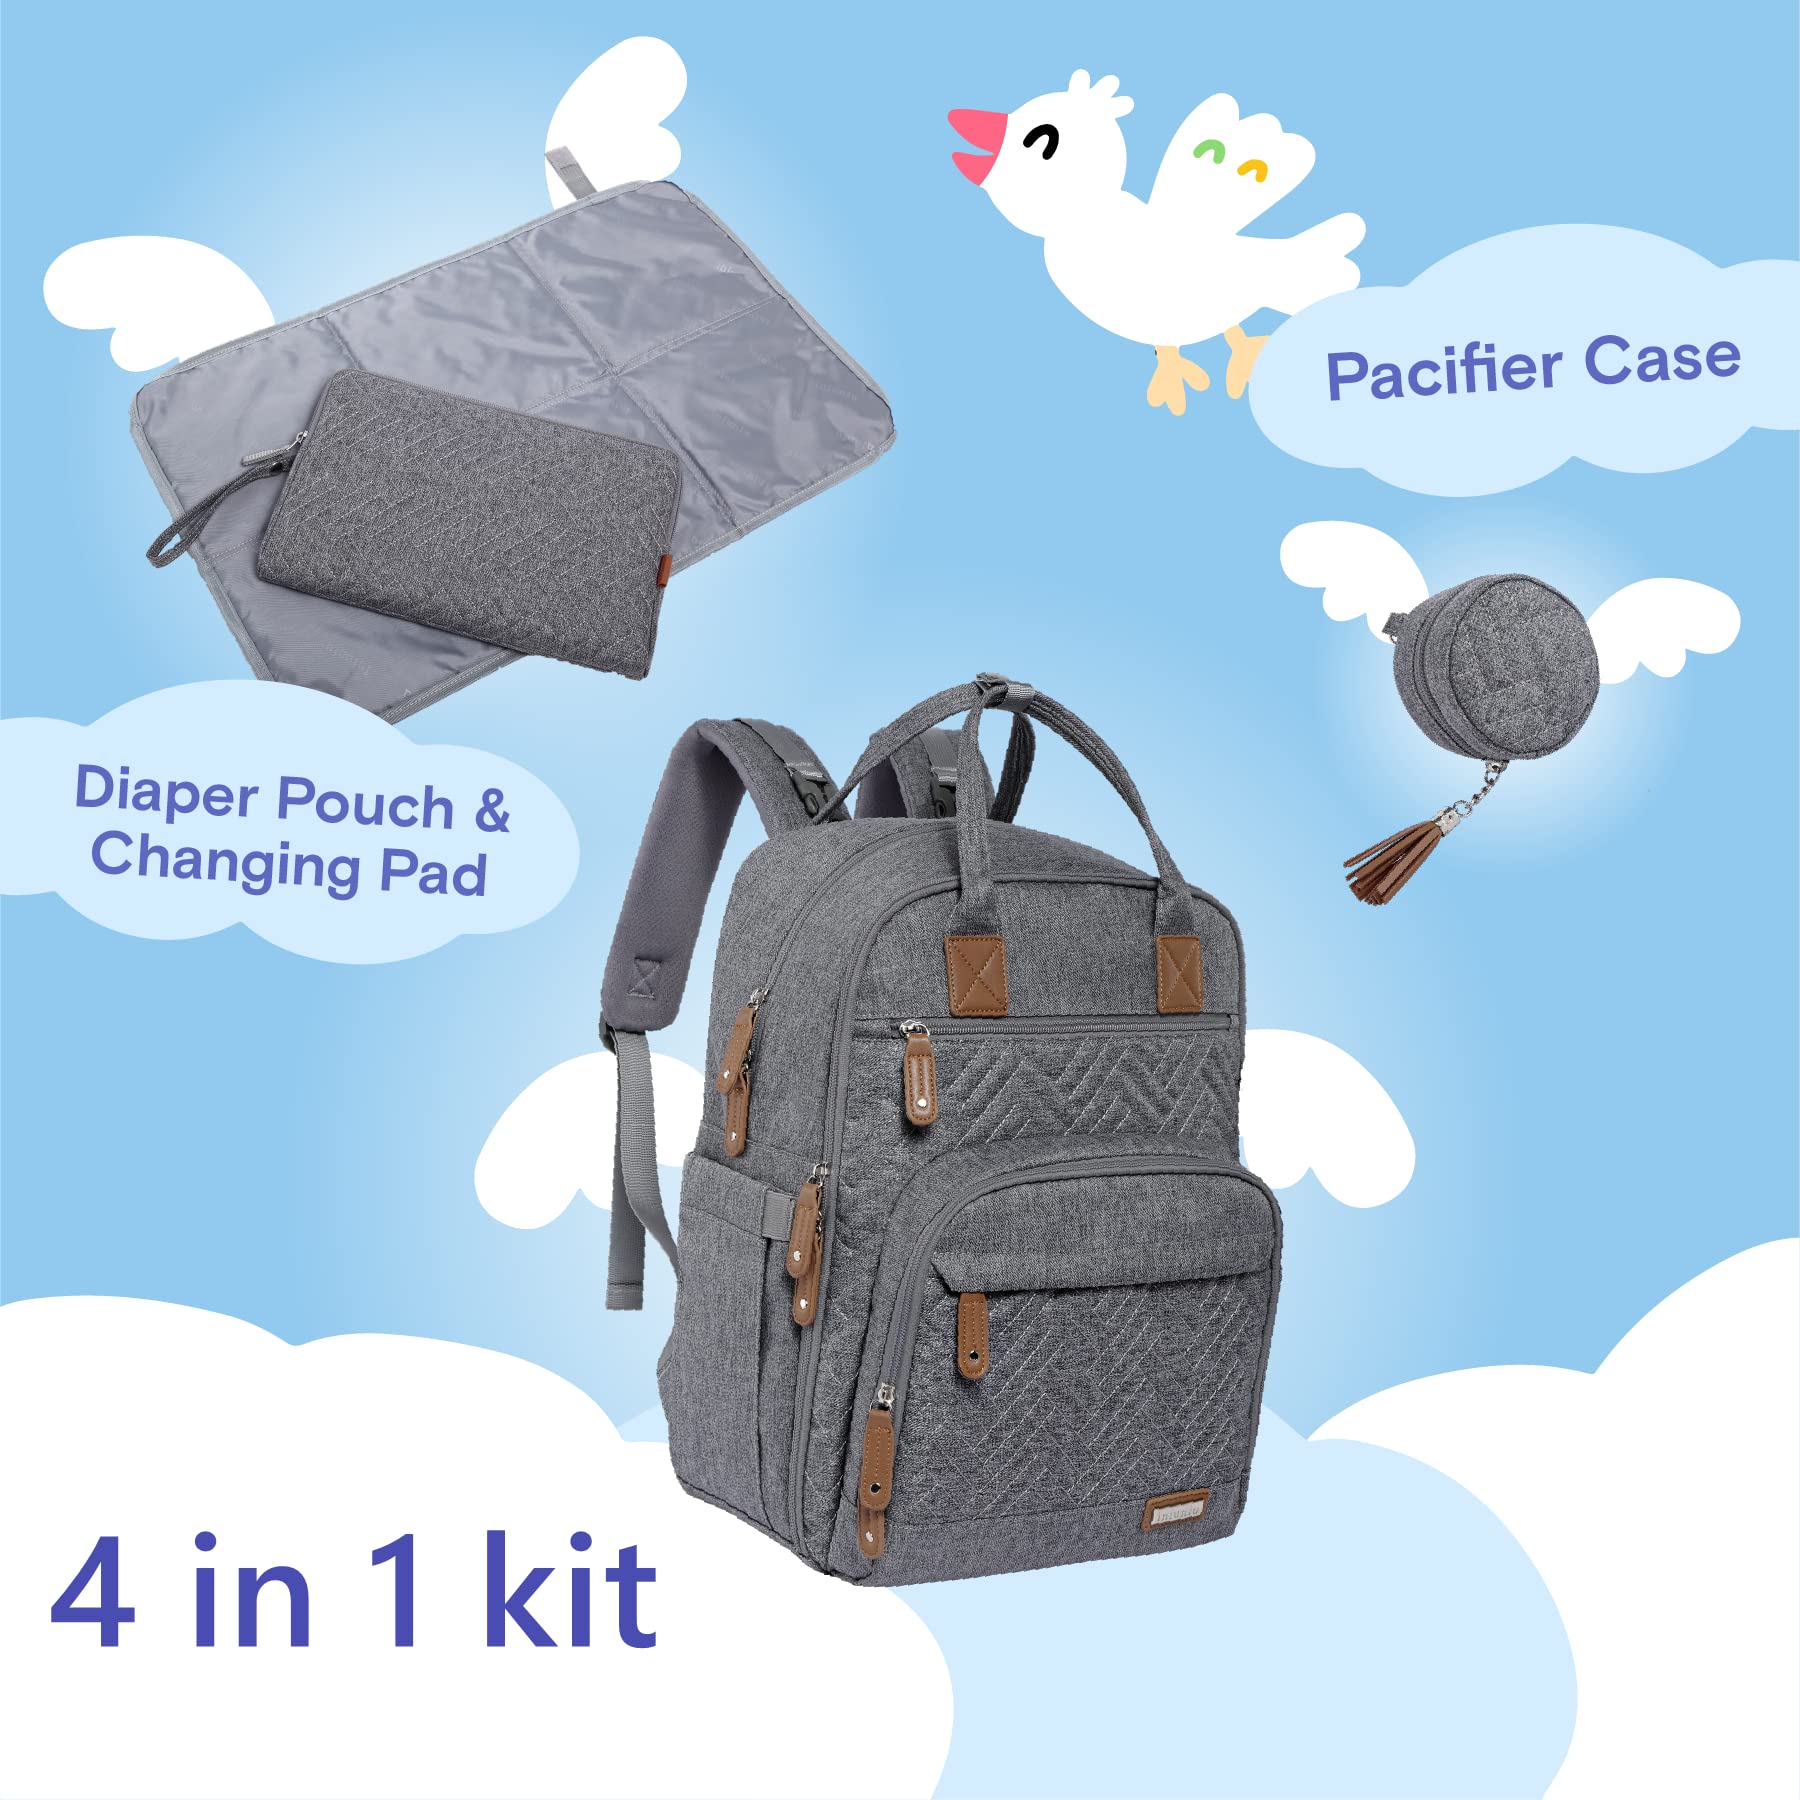 iniuniu Diaper Bag Backpack, 4 in 1 kit Large Unisex Baby Bags for Boys Girls, Waterproof Travel Back Pack with Diaper Pouch, Washable Changing Pad, Pacifier Case and Stroller Straps, Dark Gray